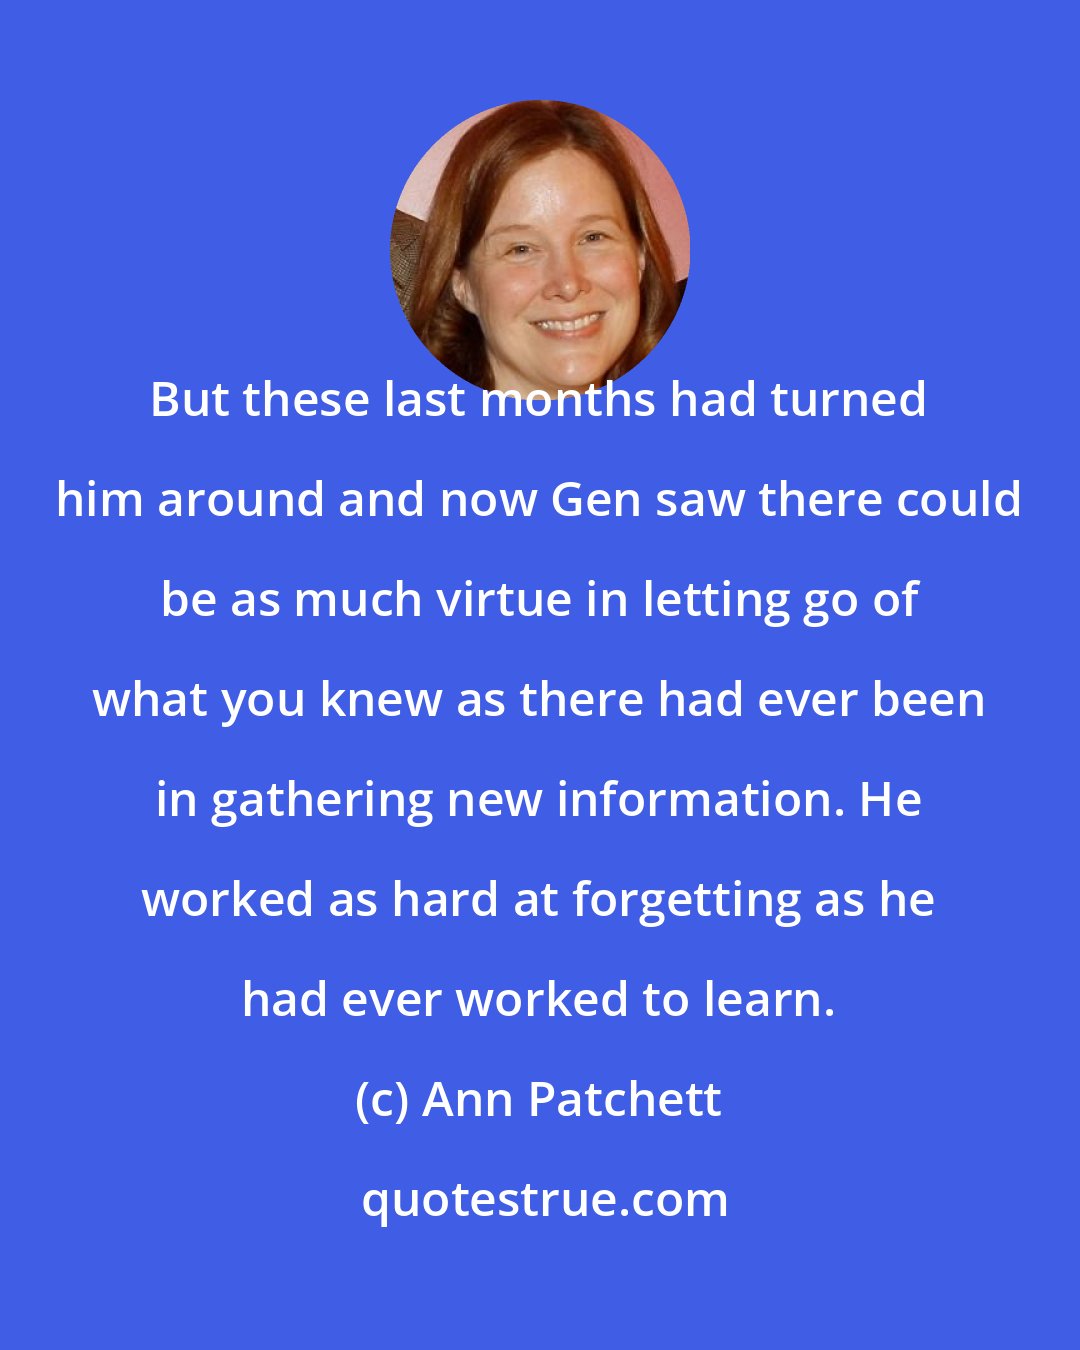 Ann Patchett: But these last months had turned him around and now Gen saw there could be as much virtue in letting go of what you knew as there had ever been in gathering new information. He worked as hard at forgetting as he had ever worked to learn.